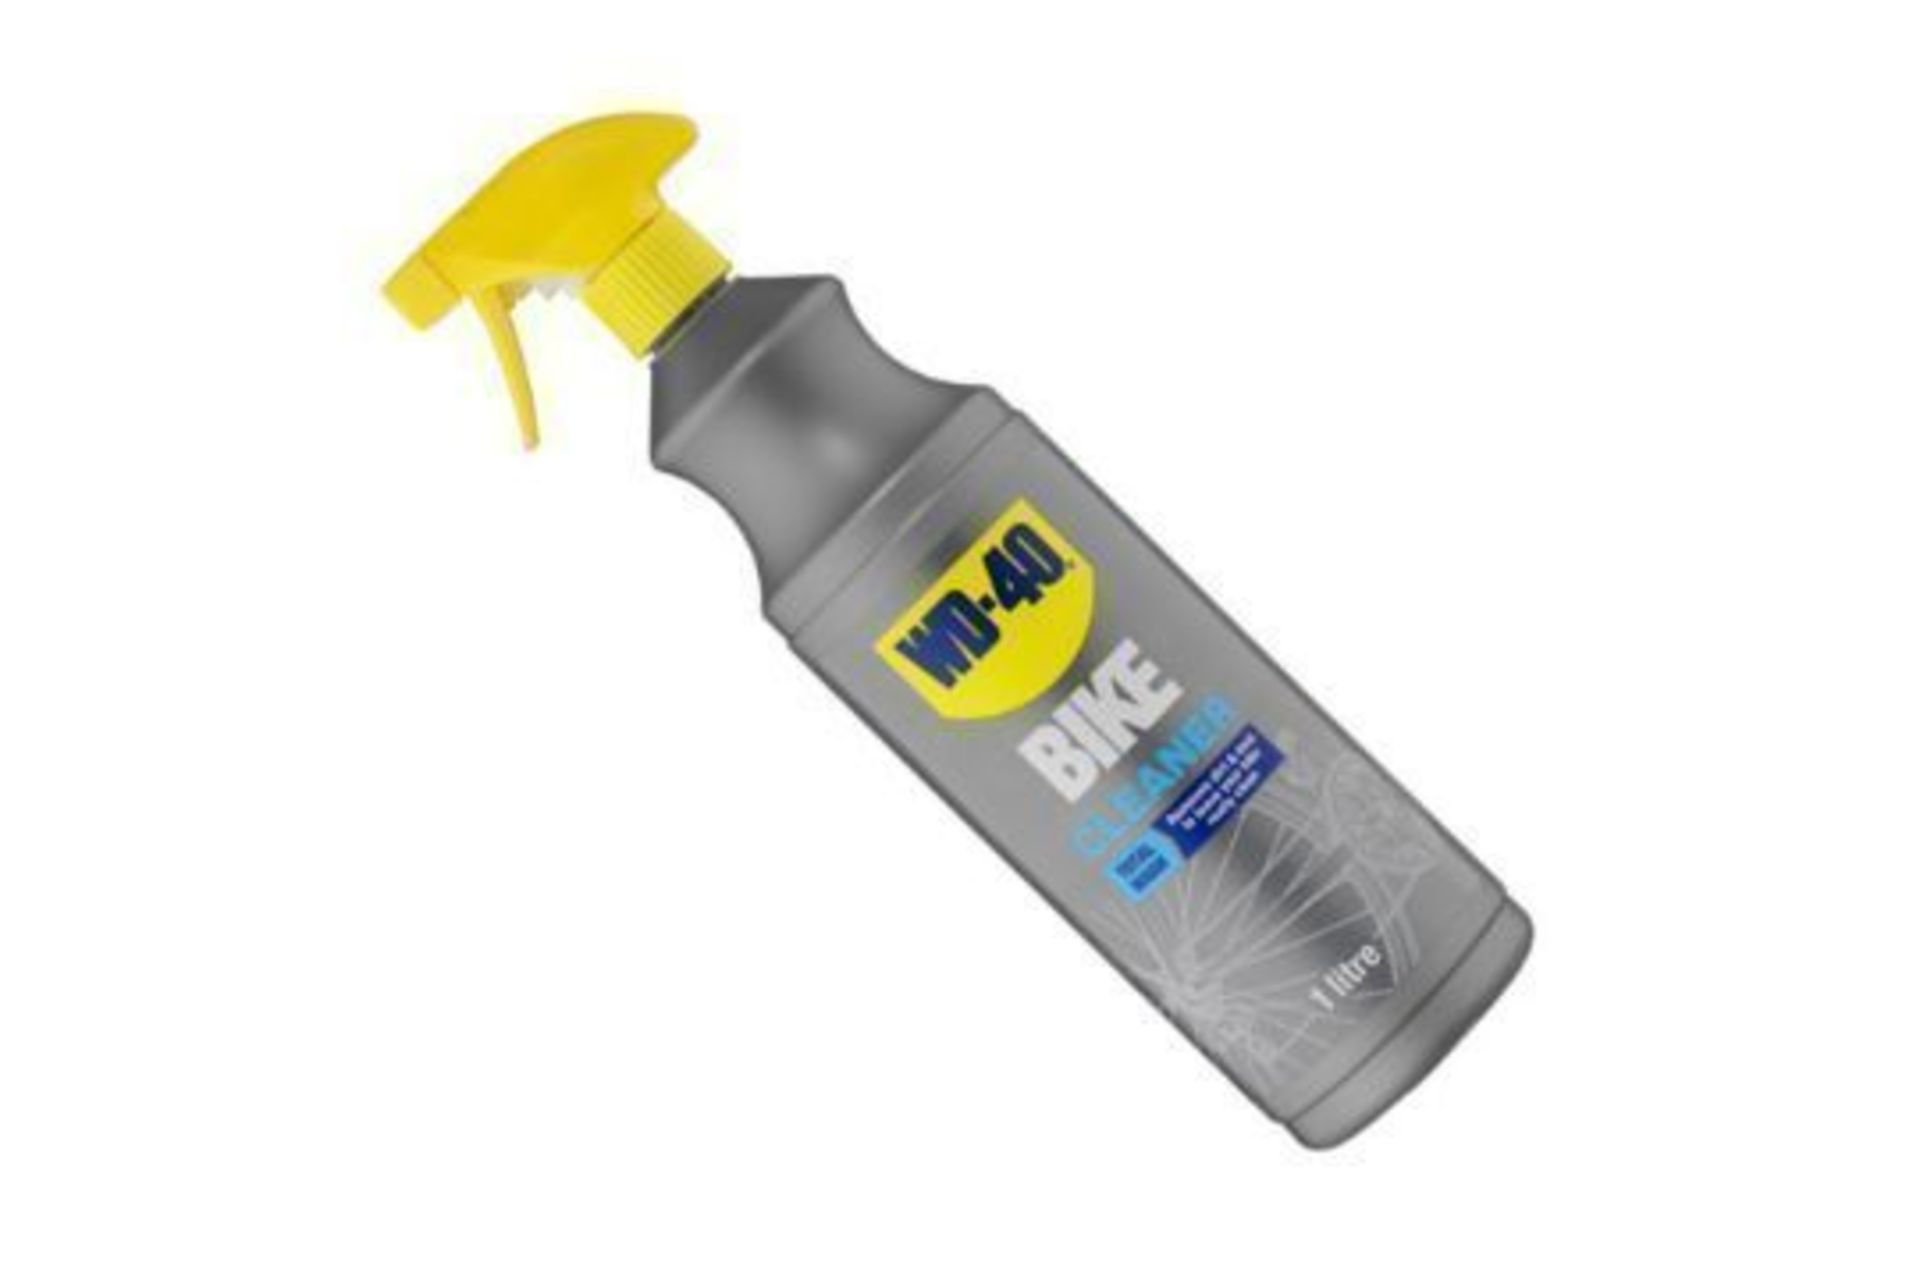 BRAND NEW 1L BOTTLE OF WD-40 BIKE CLEANER - RRP £7.99.